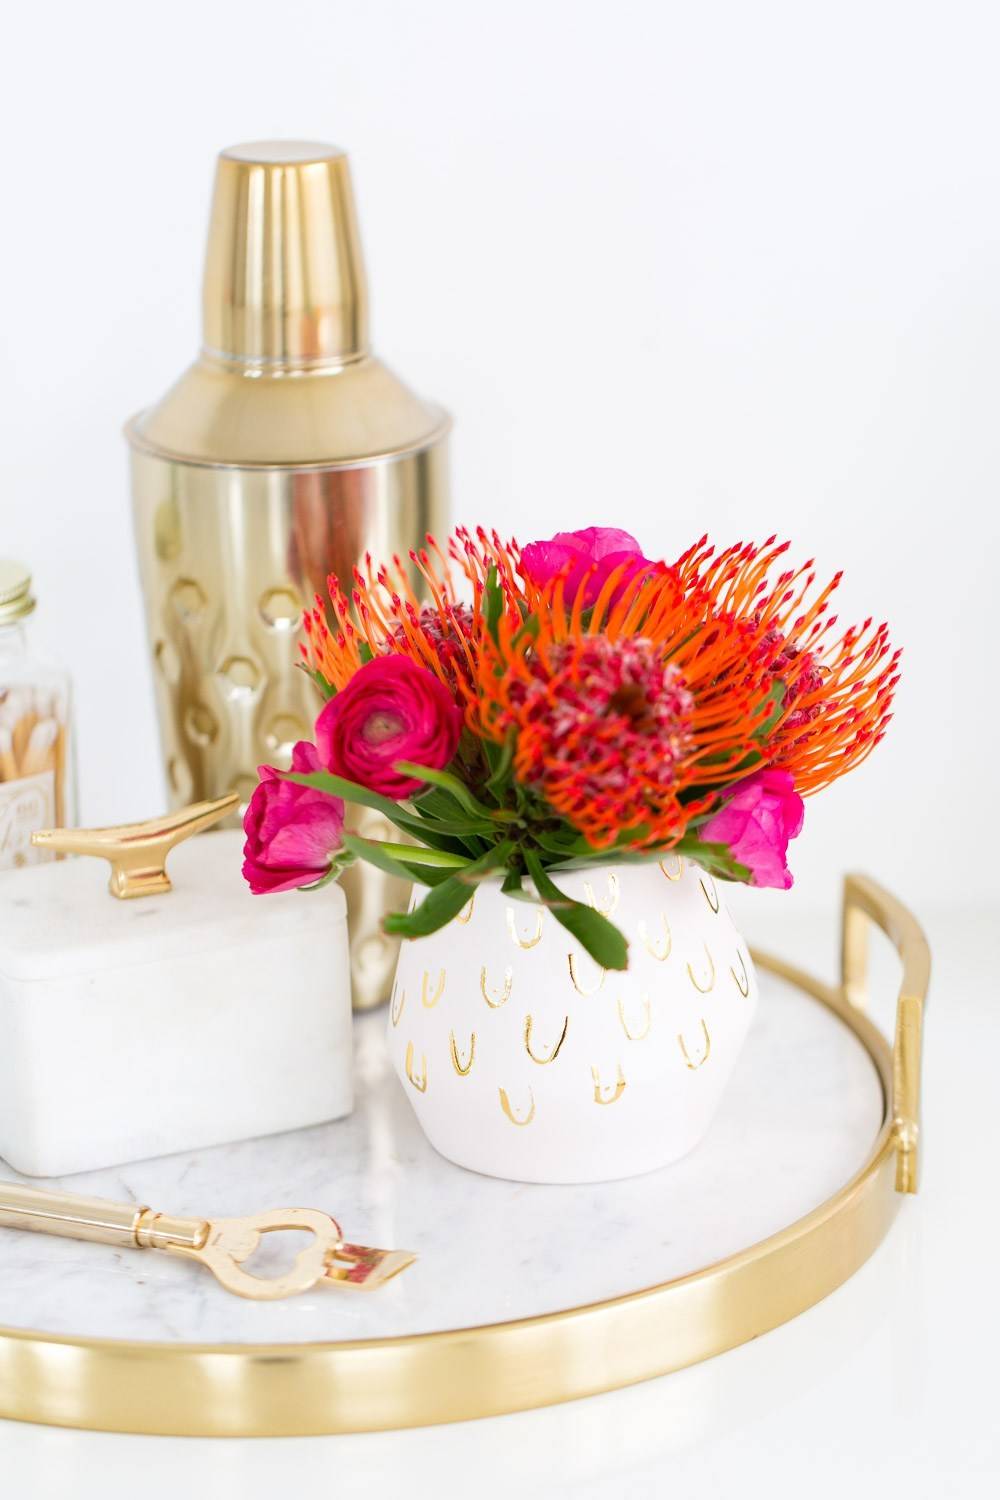 Roundup: 10 Glamorous Gold DIYs For Your Office